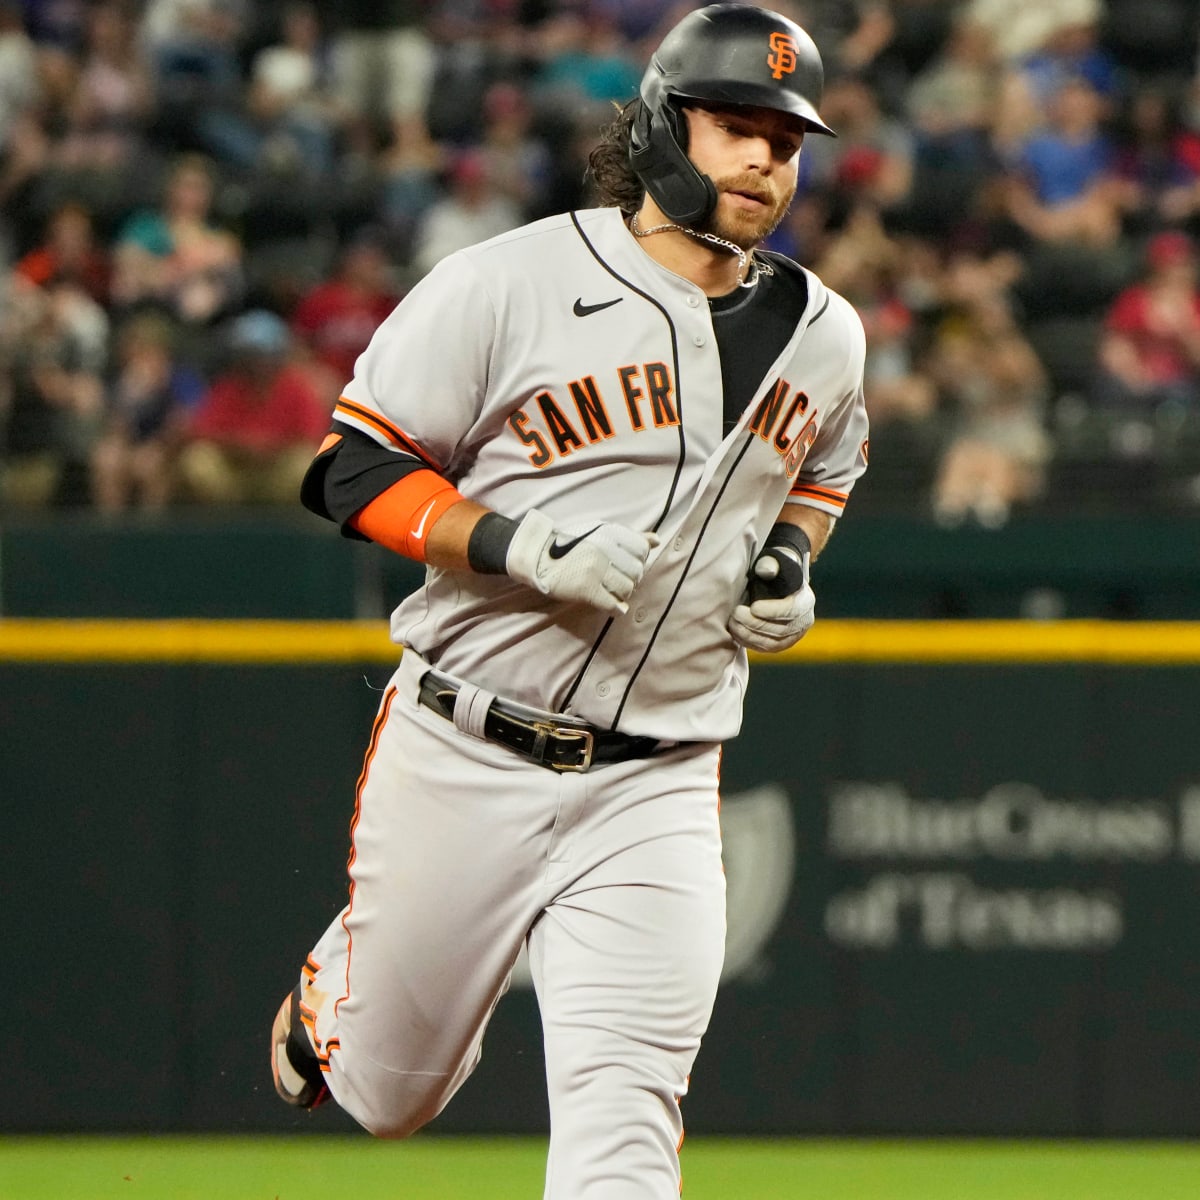 Buster Posey Will Be Missed, but Brandon Crawford and Giants Look